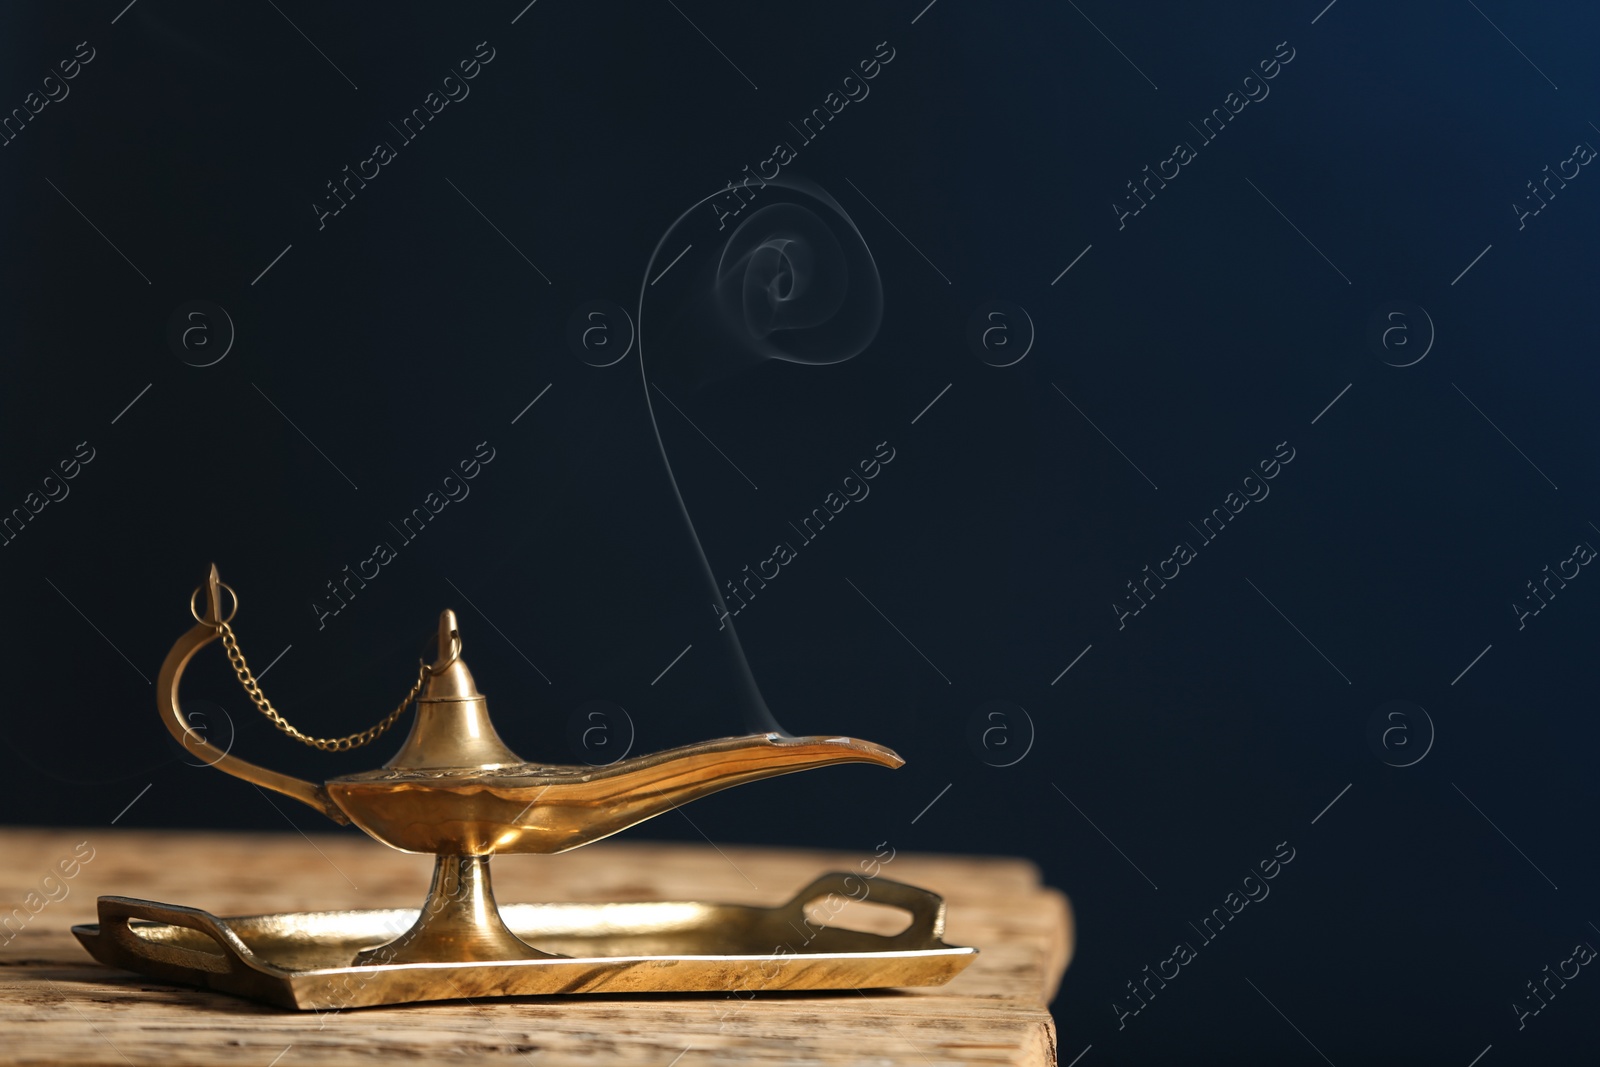 Photo of Aladdin lamp of wishes on wooden table against dark background